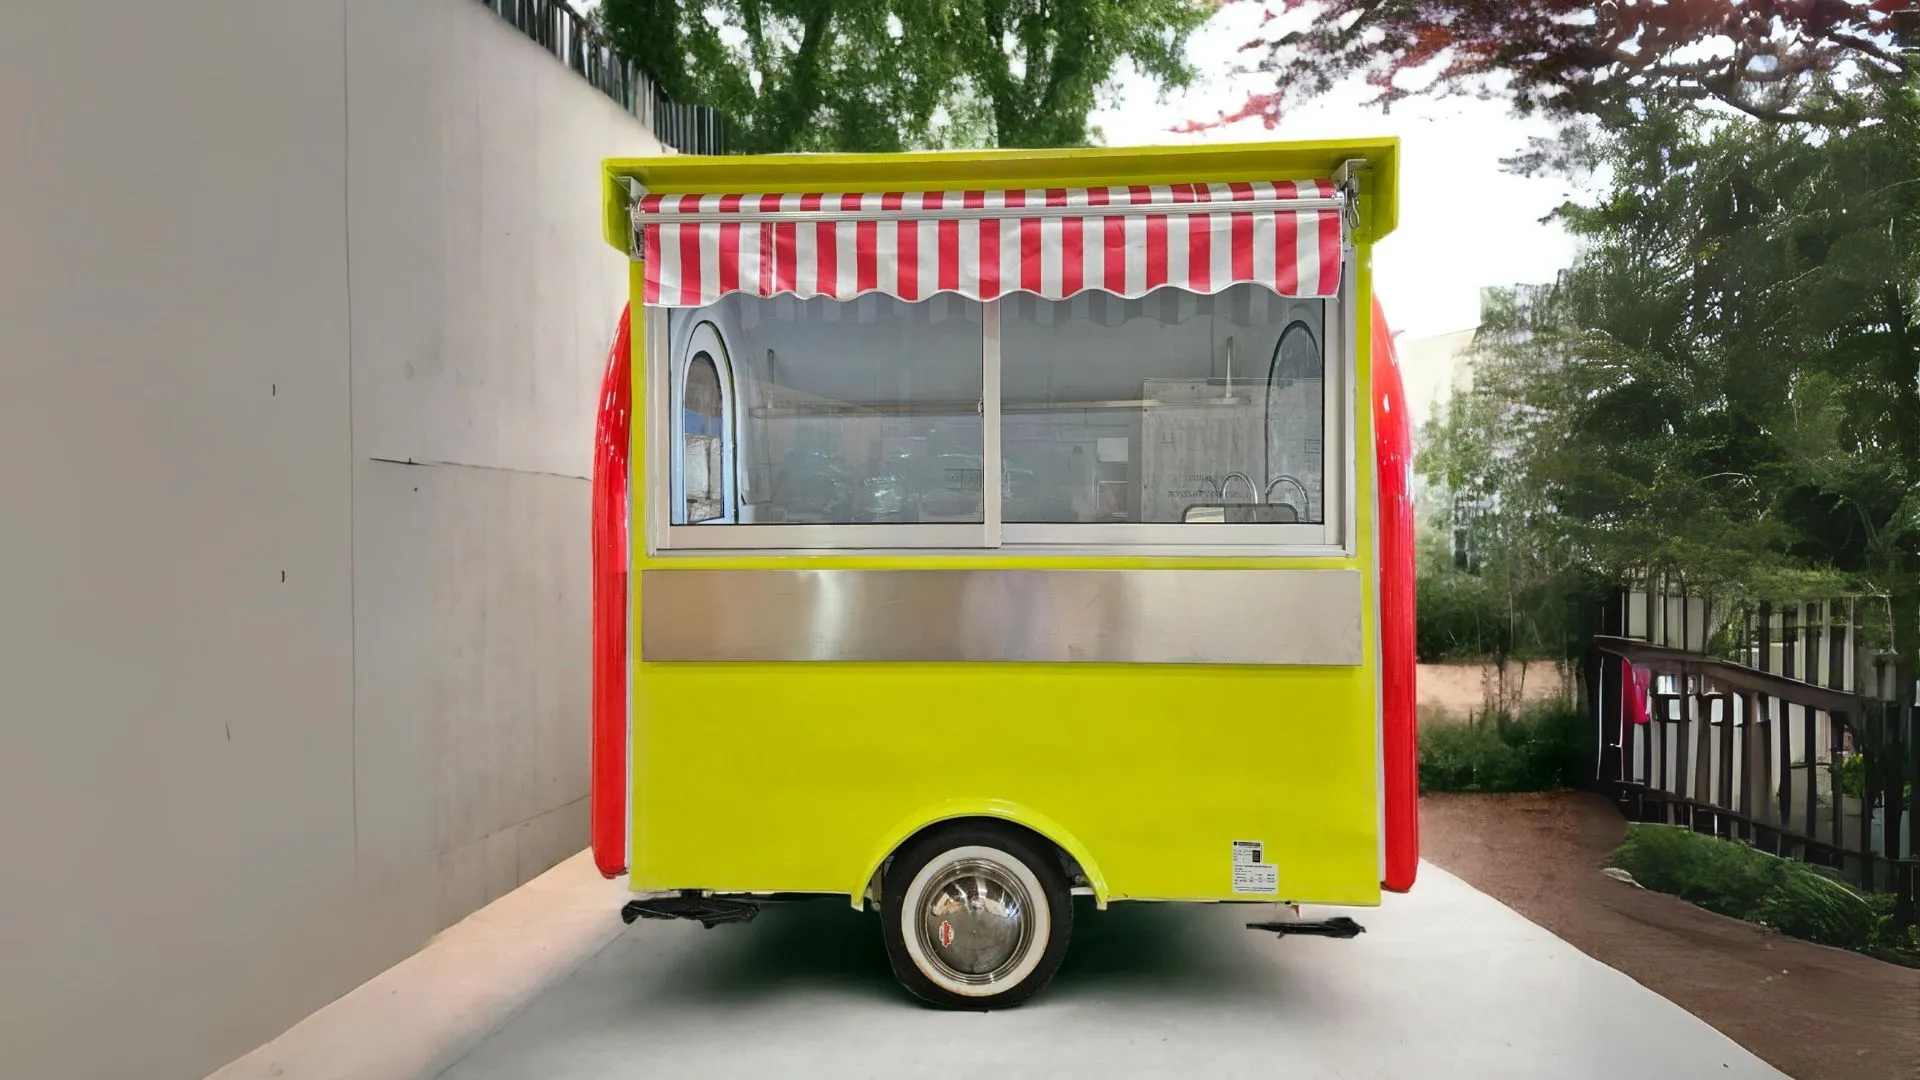 Discover the perfect Food Truck for Sale in the USA - the Best Lumiere Food Trailer with Italian Retro Charm. Our versatile food truck offers Taco, Hot Dog, Tamales, Coffee, Ice Cream and more. Equipped with 3 sinks, a fryer, and a rain protection system, it's a complete mobile kitchen. Explore this unique opportunity now from Trailer Concept